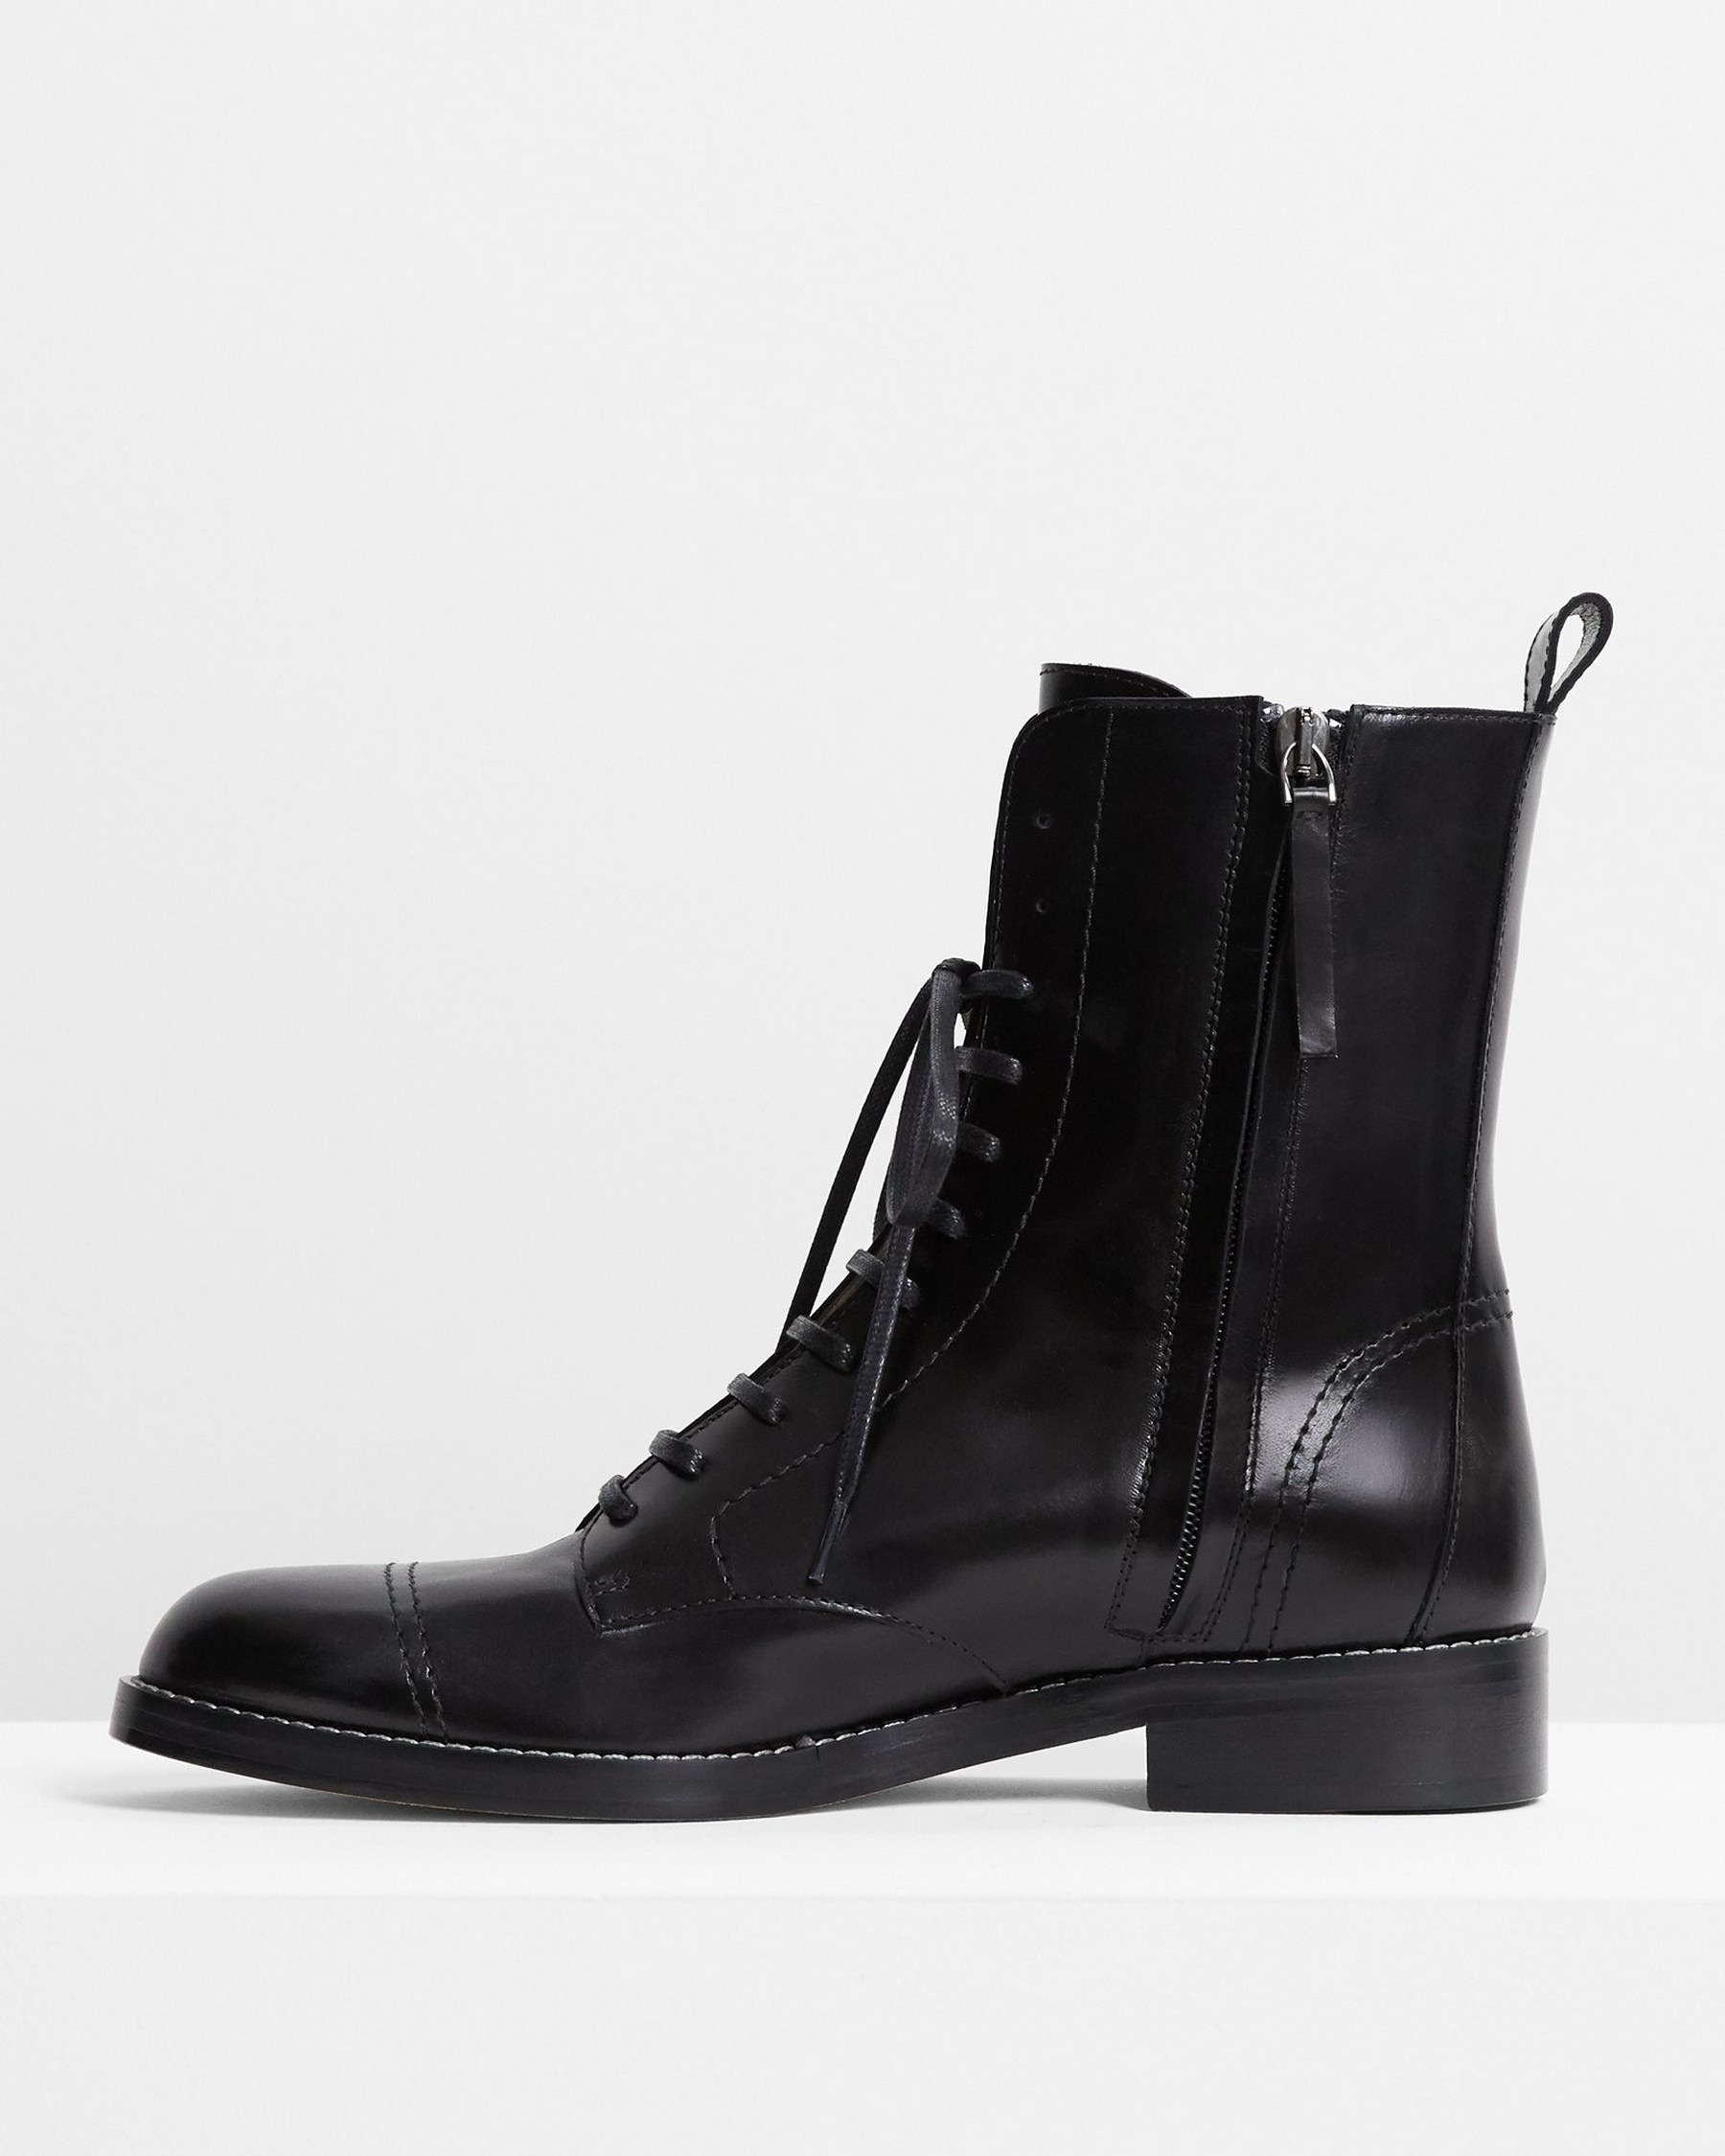 Laced Boot in Satin Leather